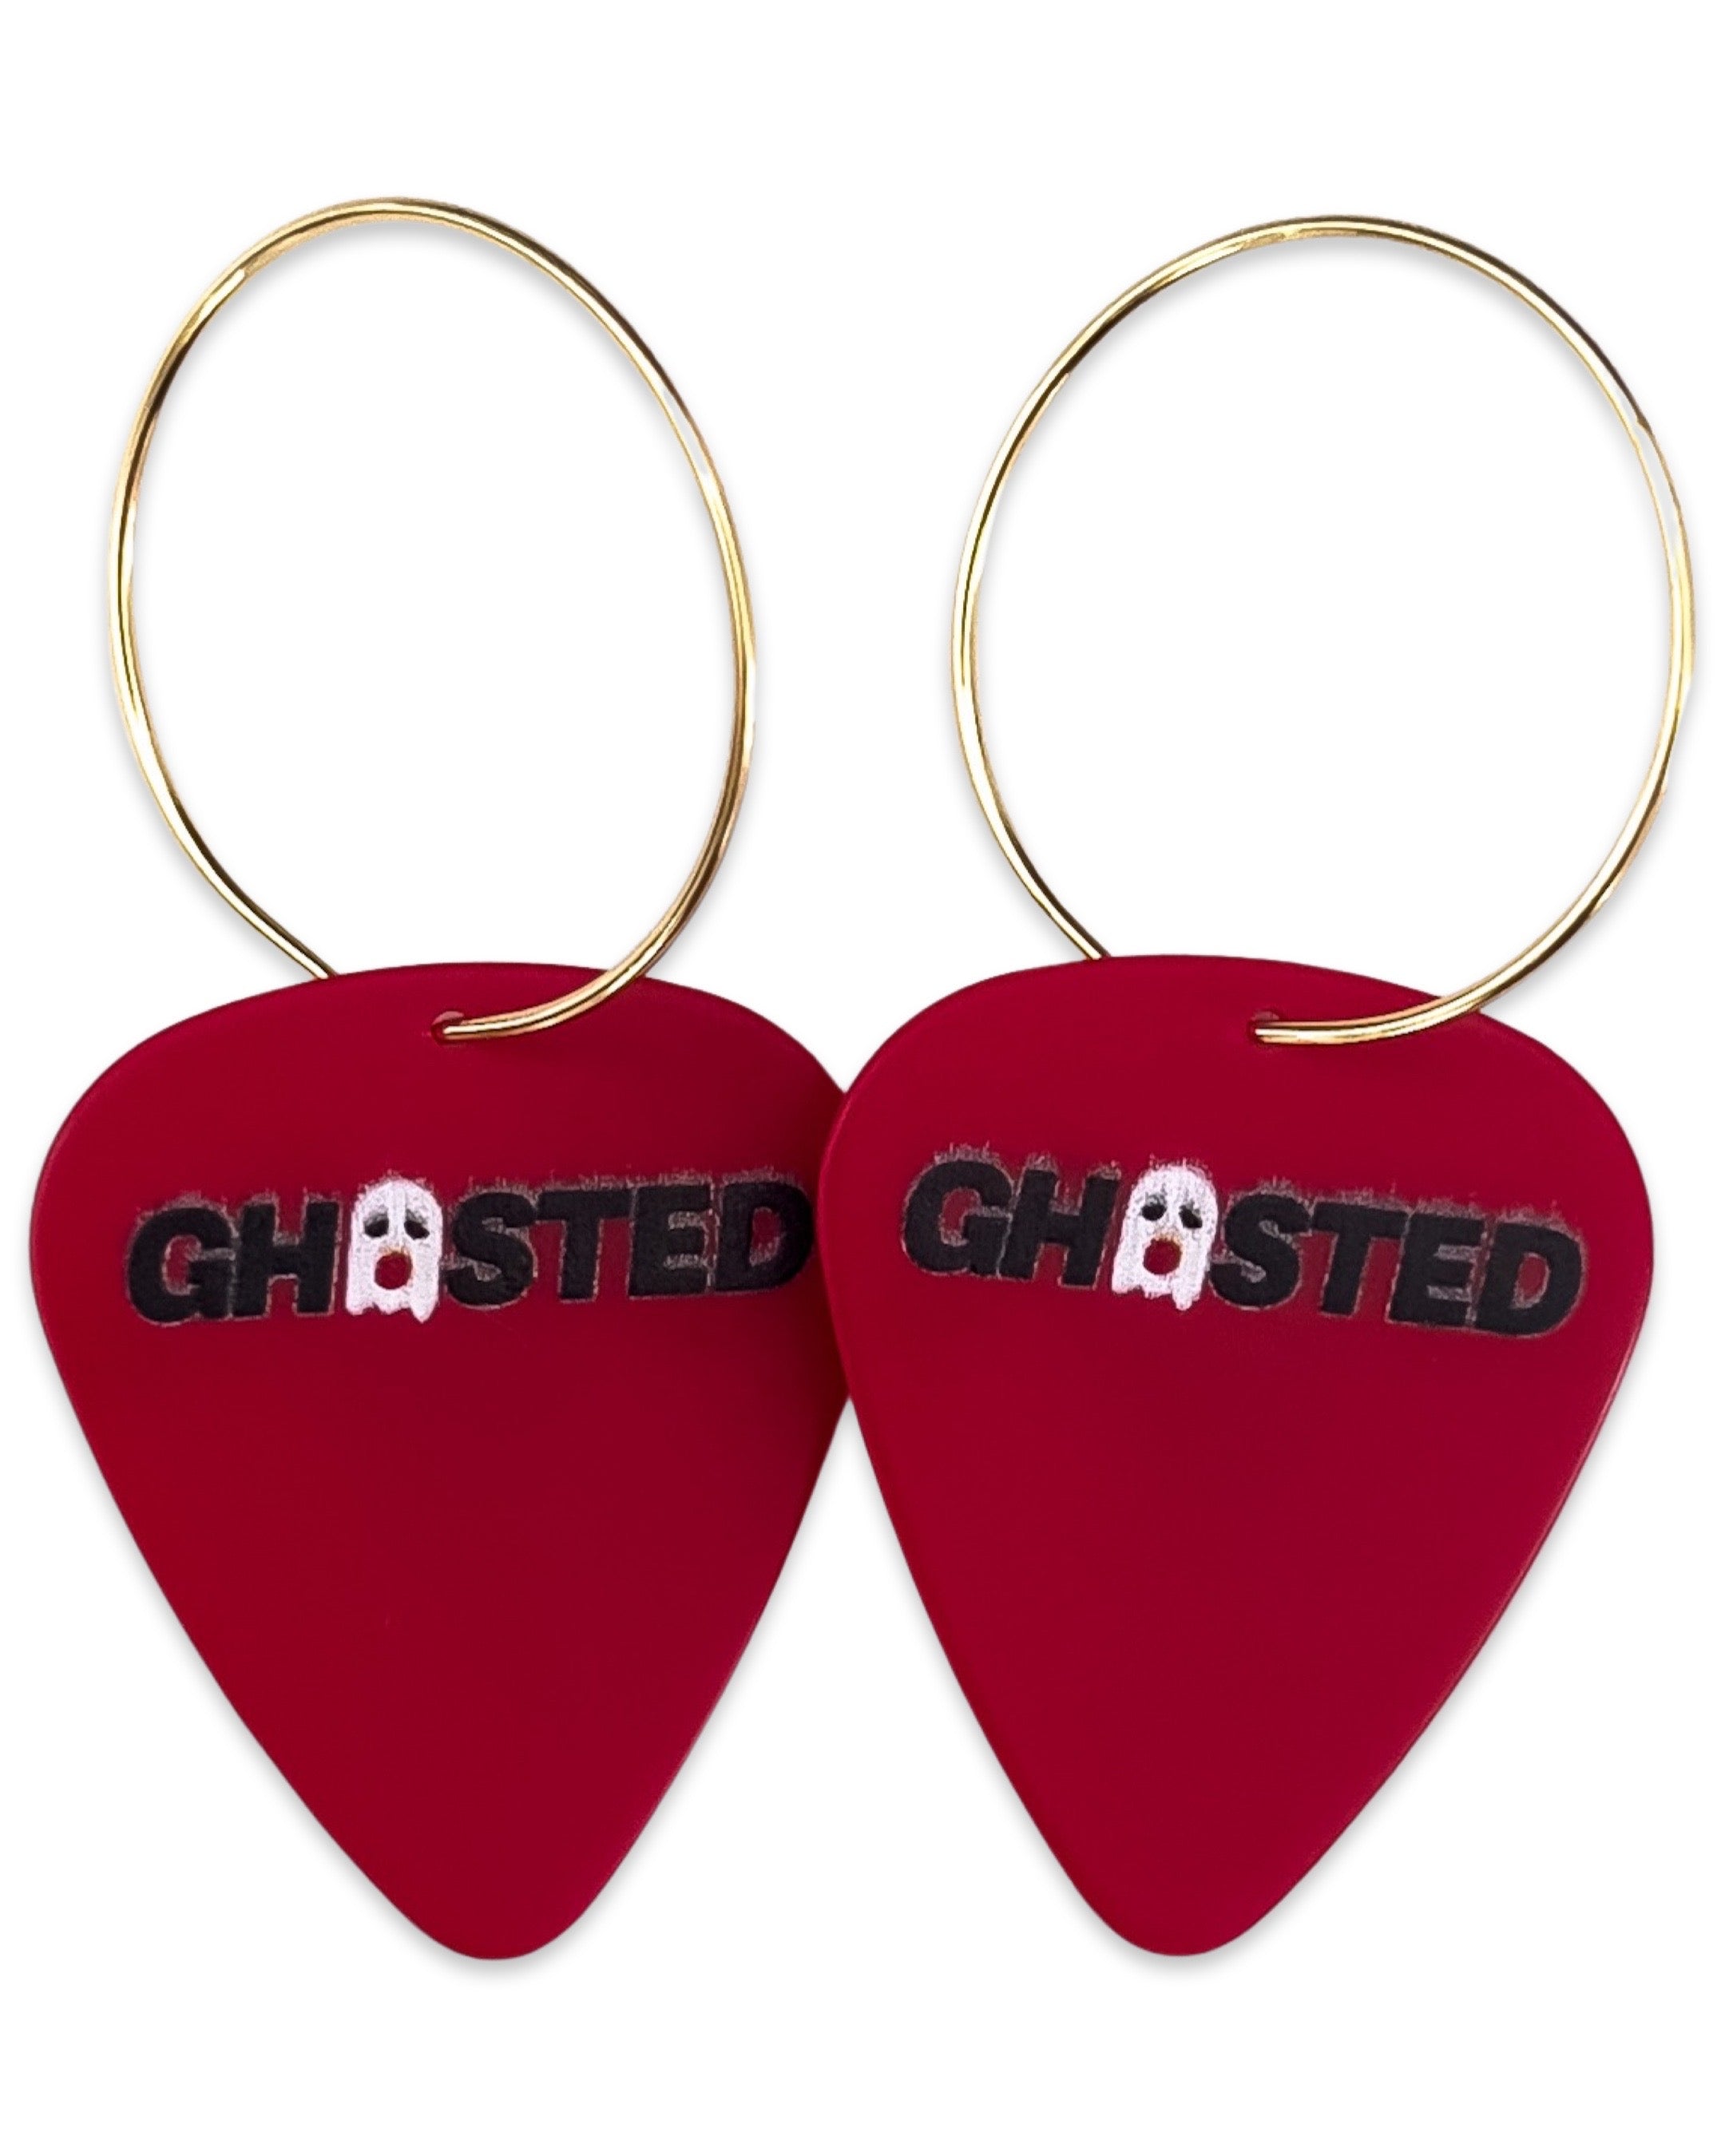 Ghosted, Women’s, Halloween, Red, Guitar Pick Earrings